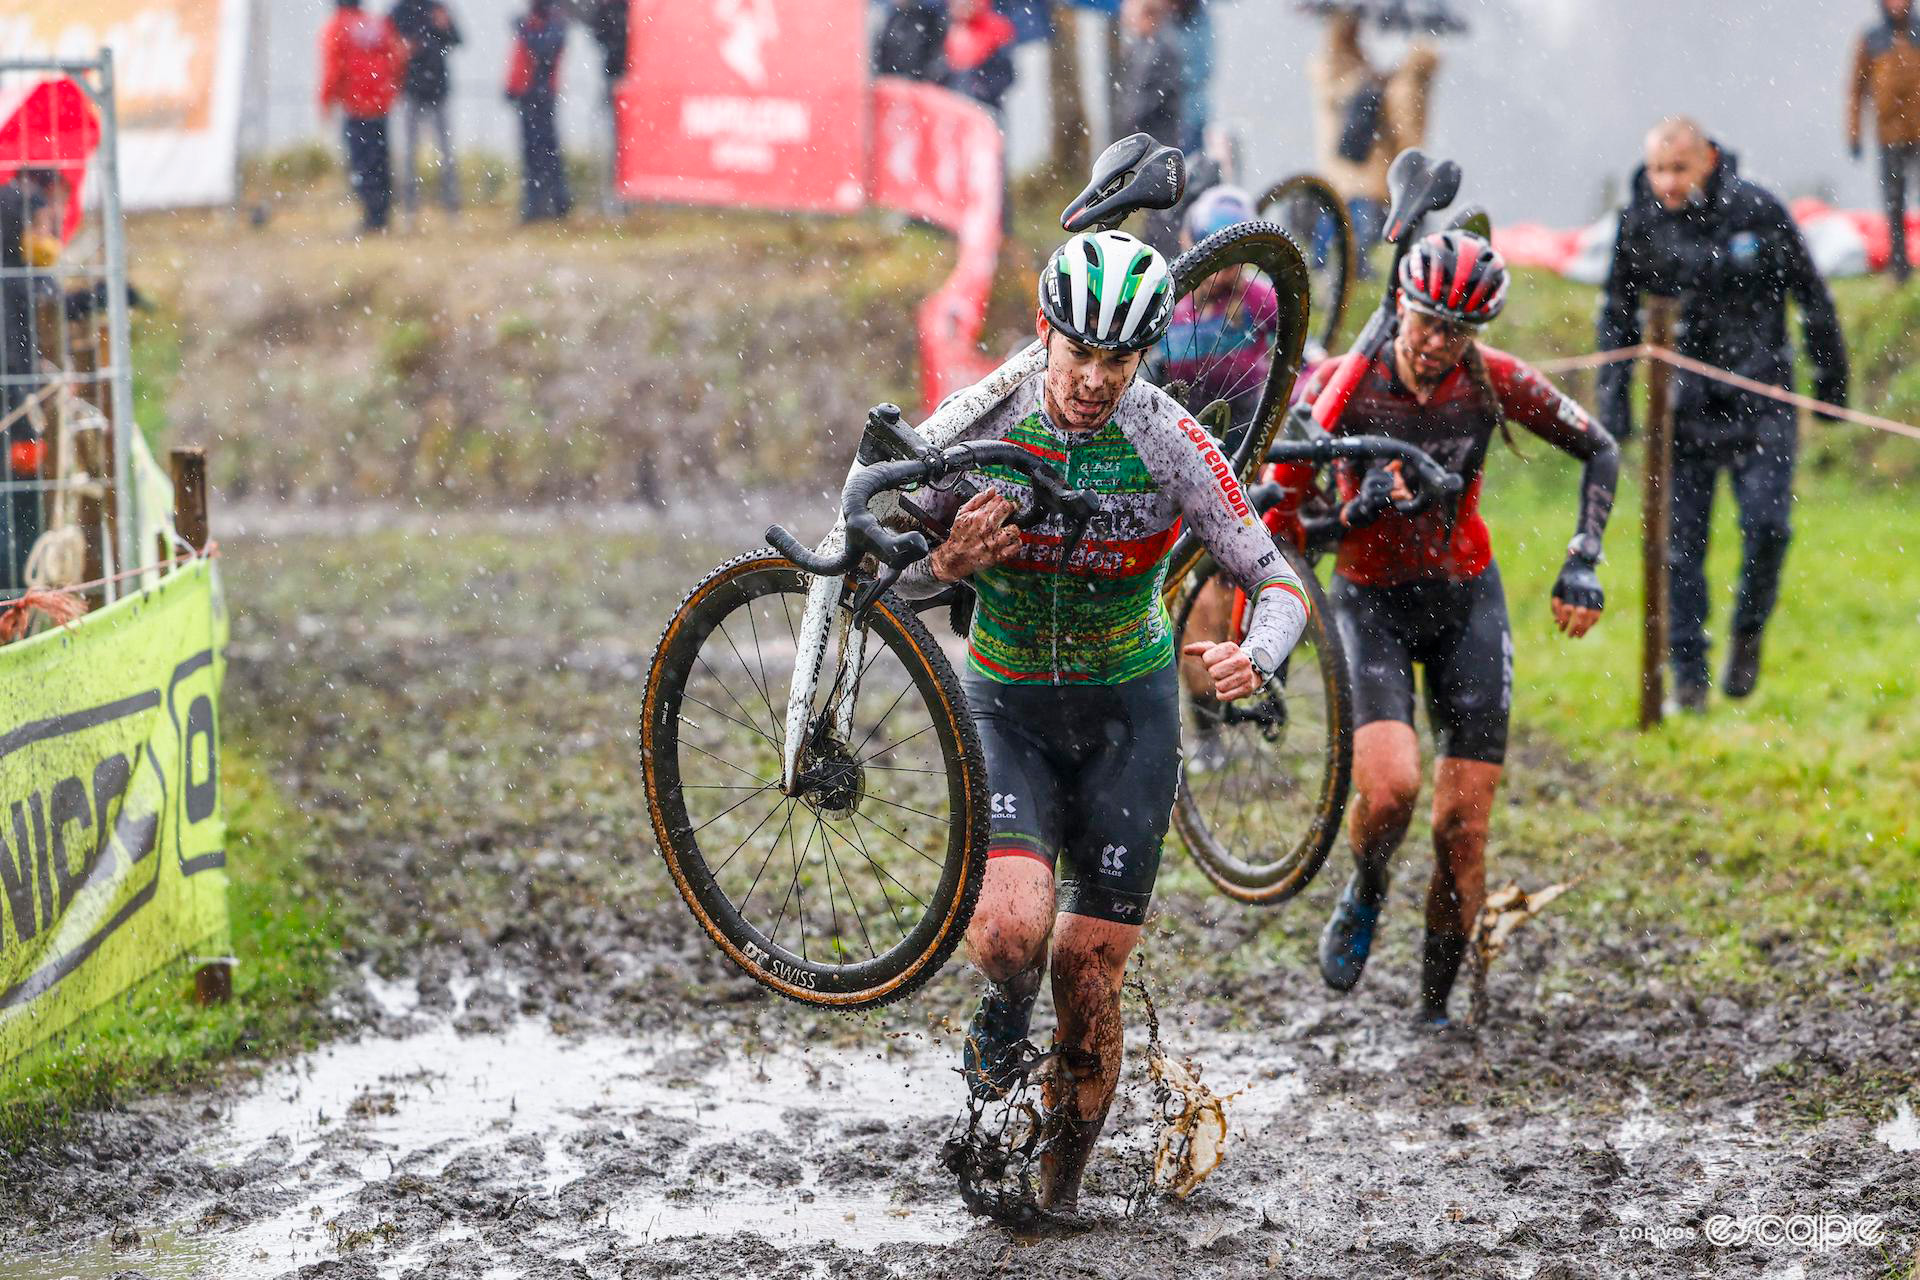 Marion Norbert Riberolle during a very wet and muddy Exact Cross Essen.